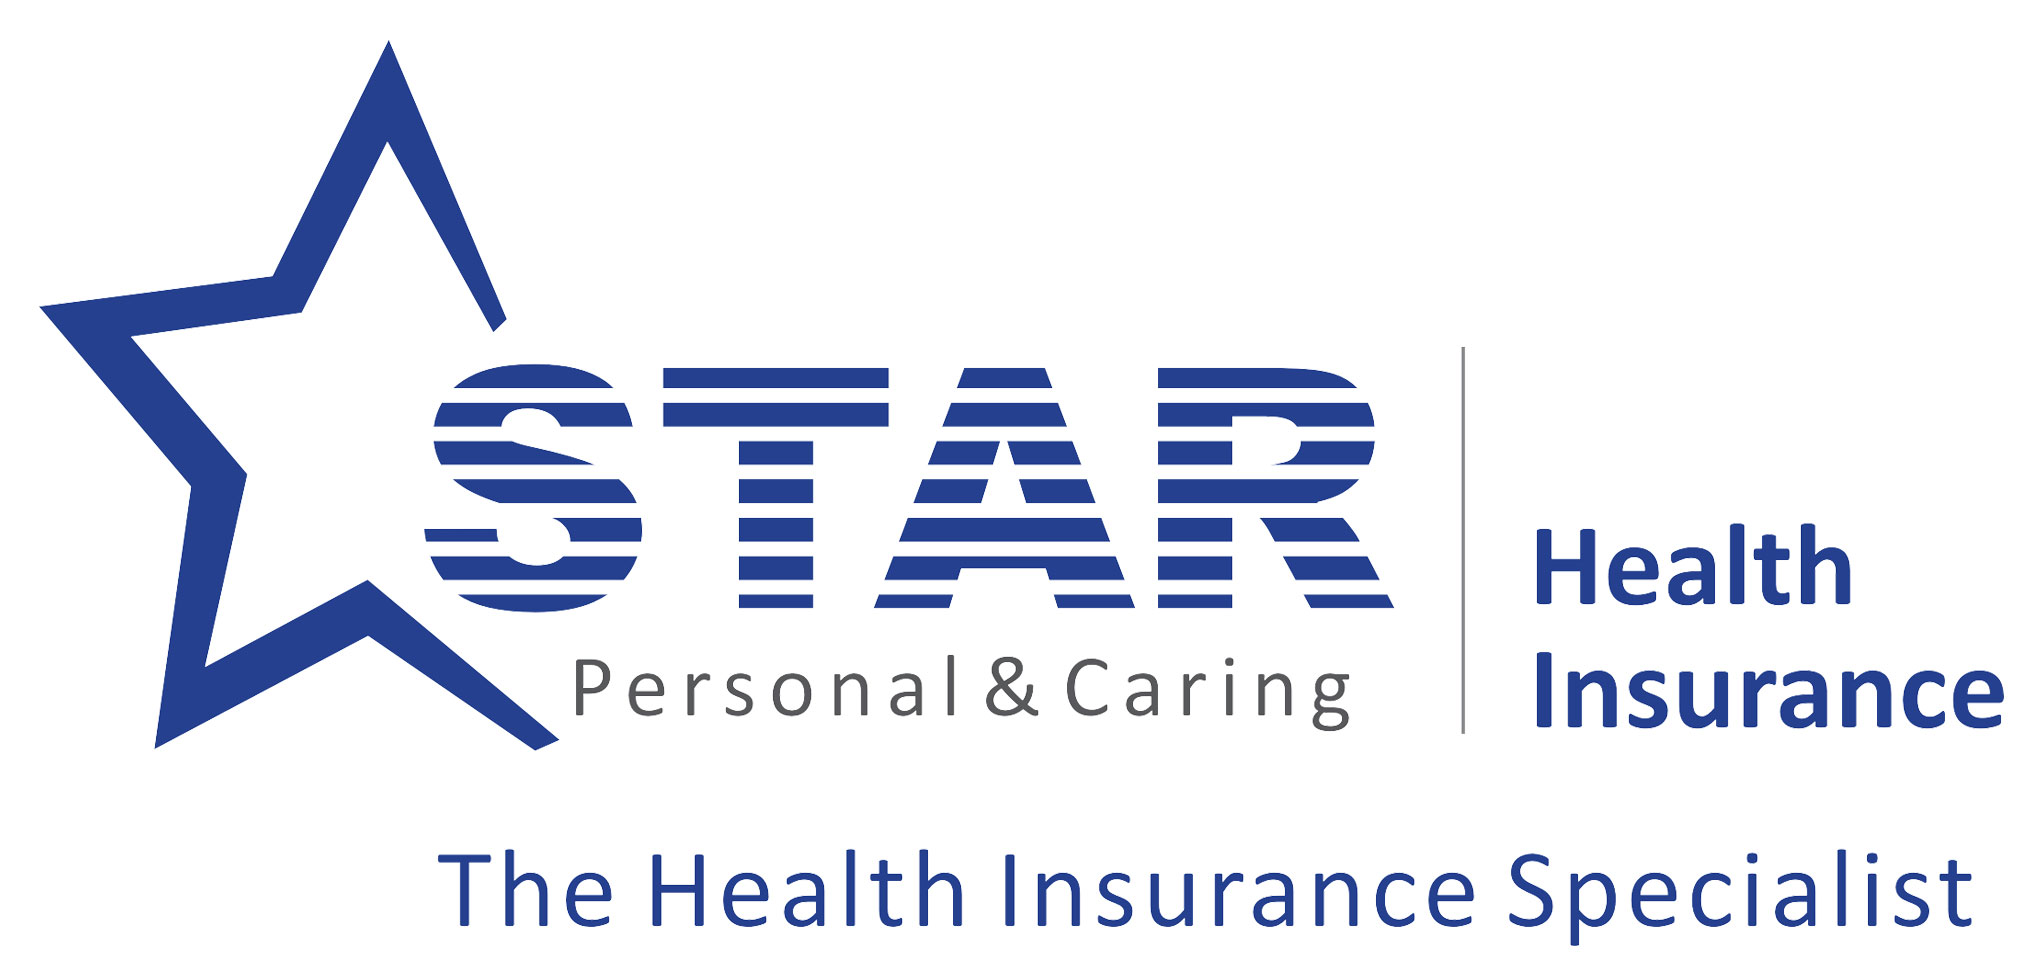 Guide to Covid 19 cover under Star Health Insurance